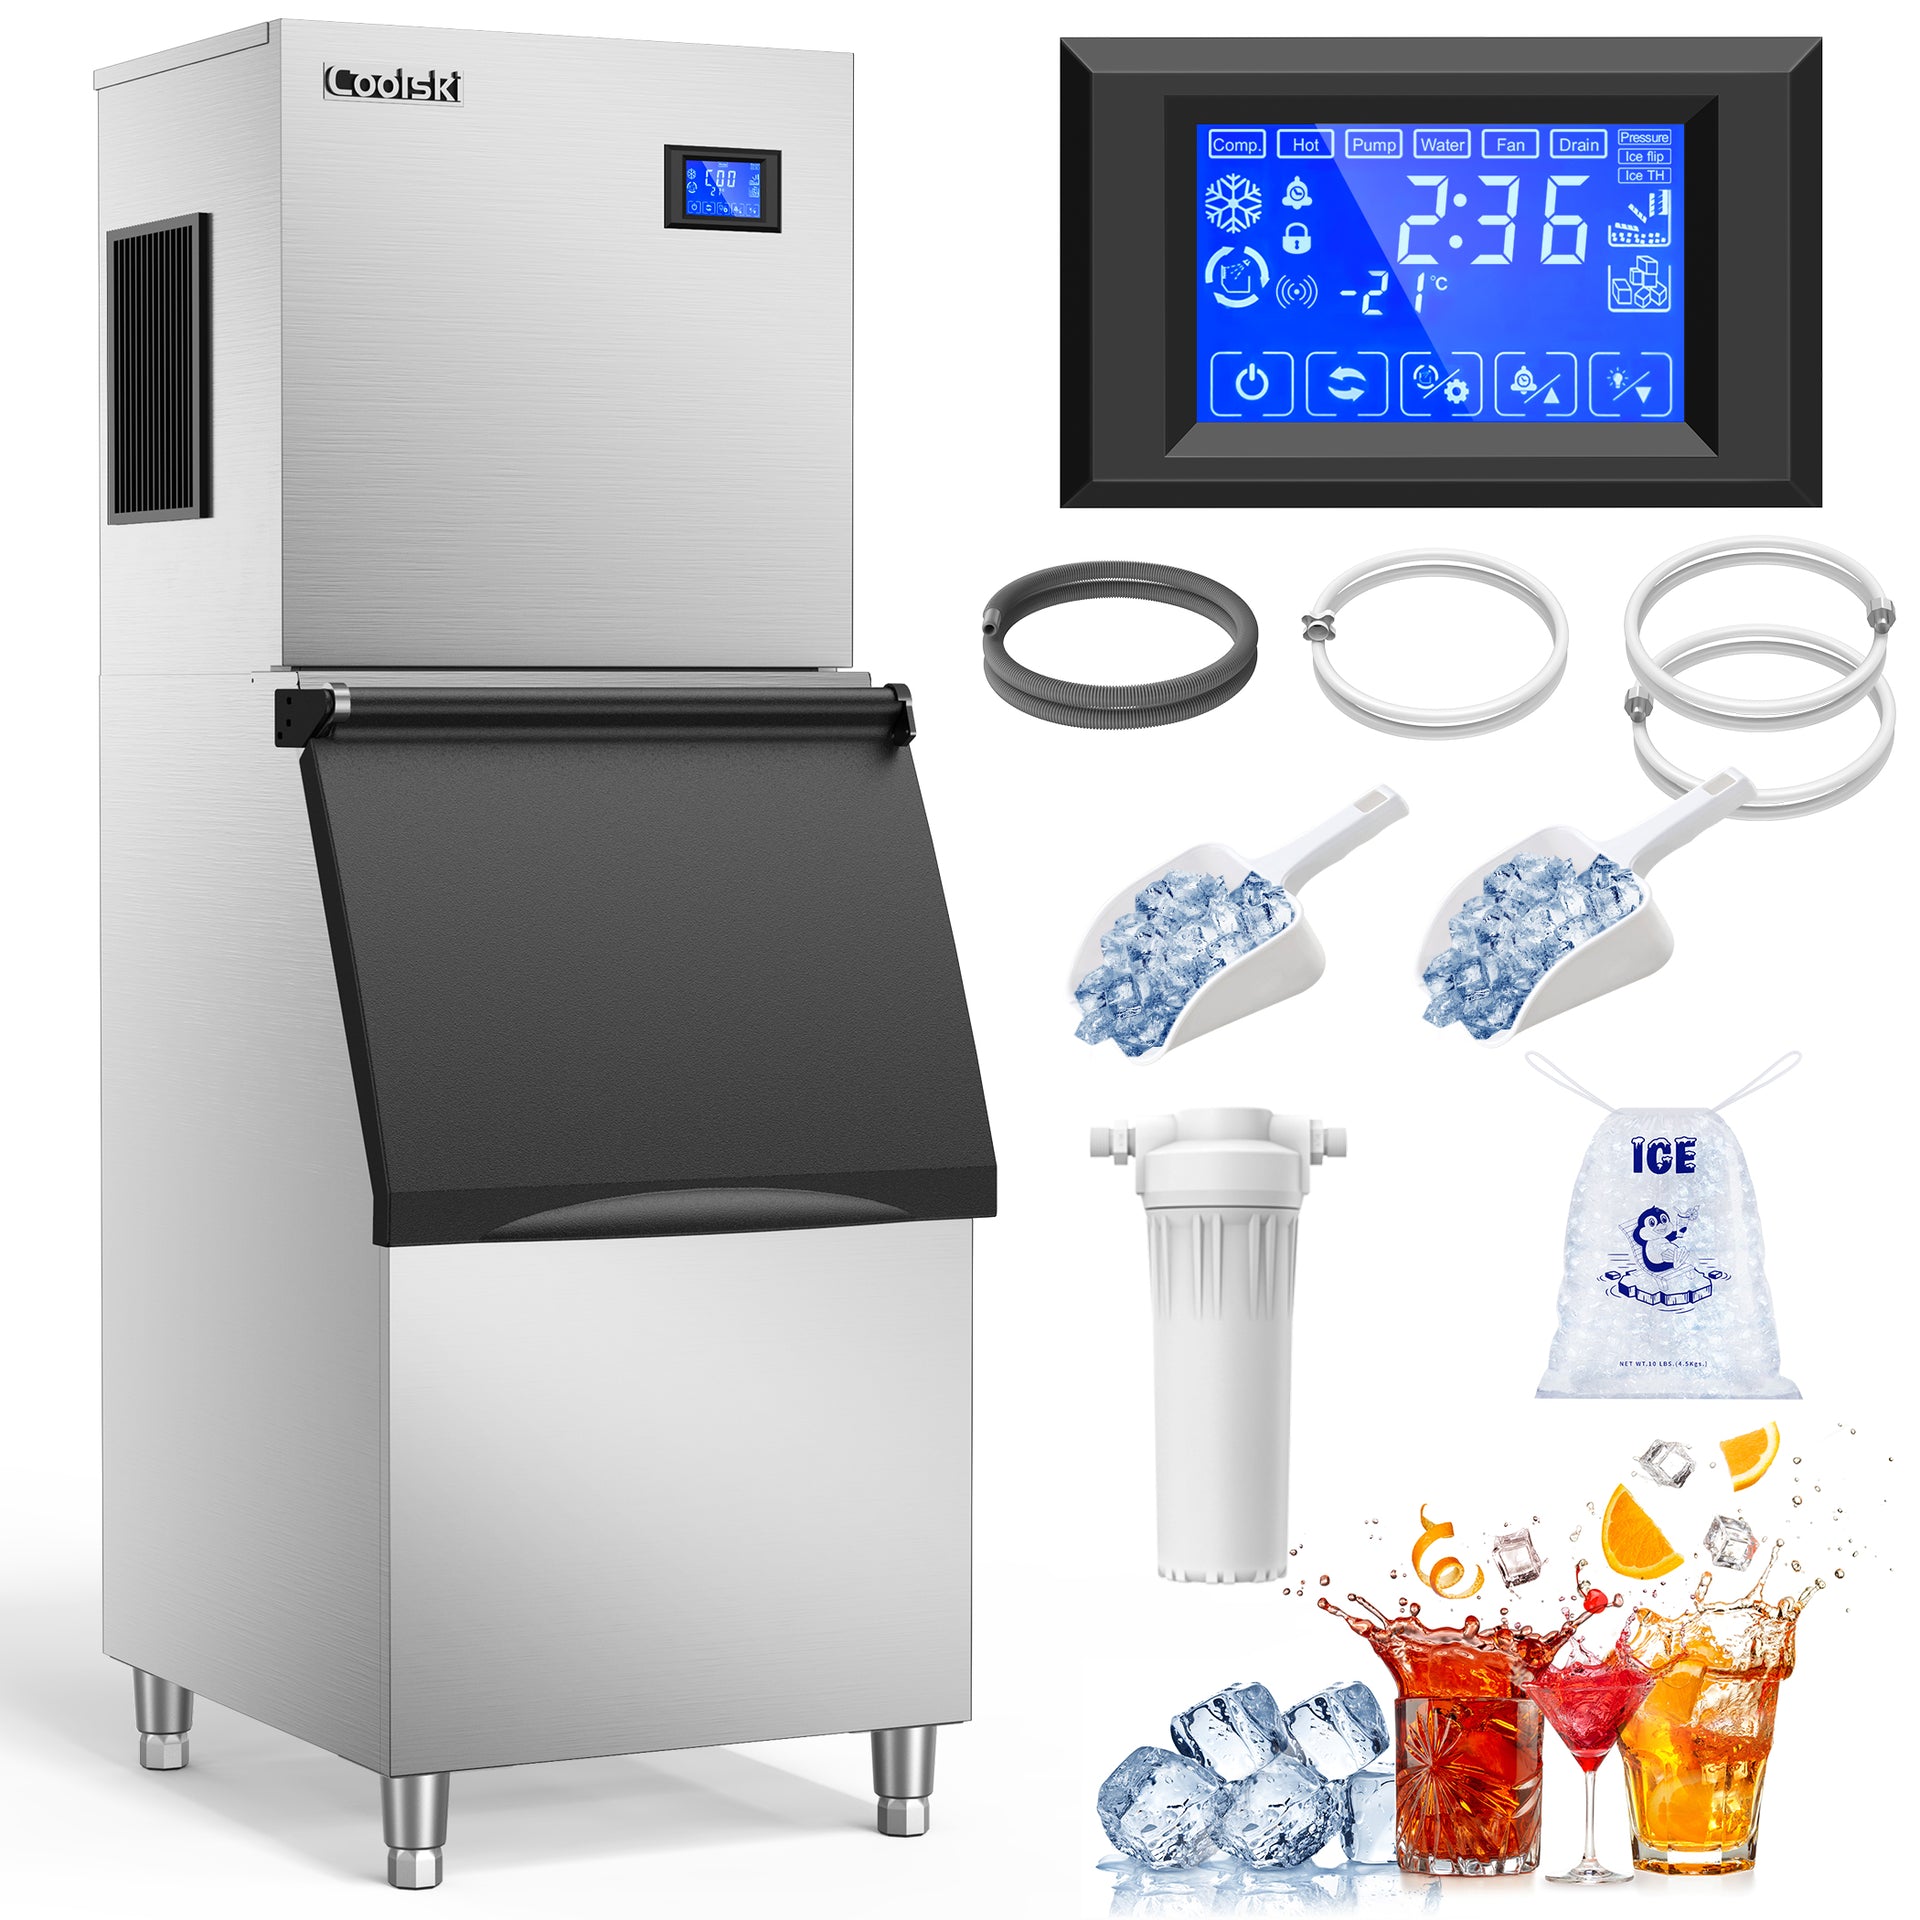 Coolski 26'' Undercounter Ice Machine 200LBS/24H - Coolski Ice Machines,  Engineered with Decades of Expertise for Your Daily High Demands. – Coolski  Official